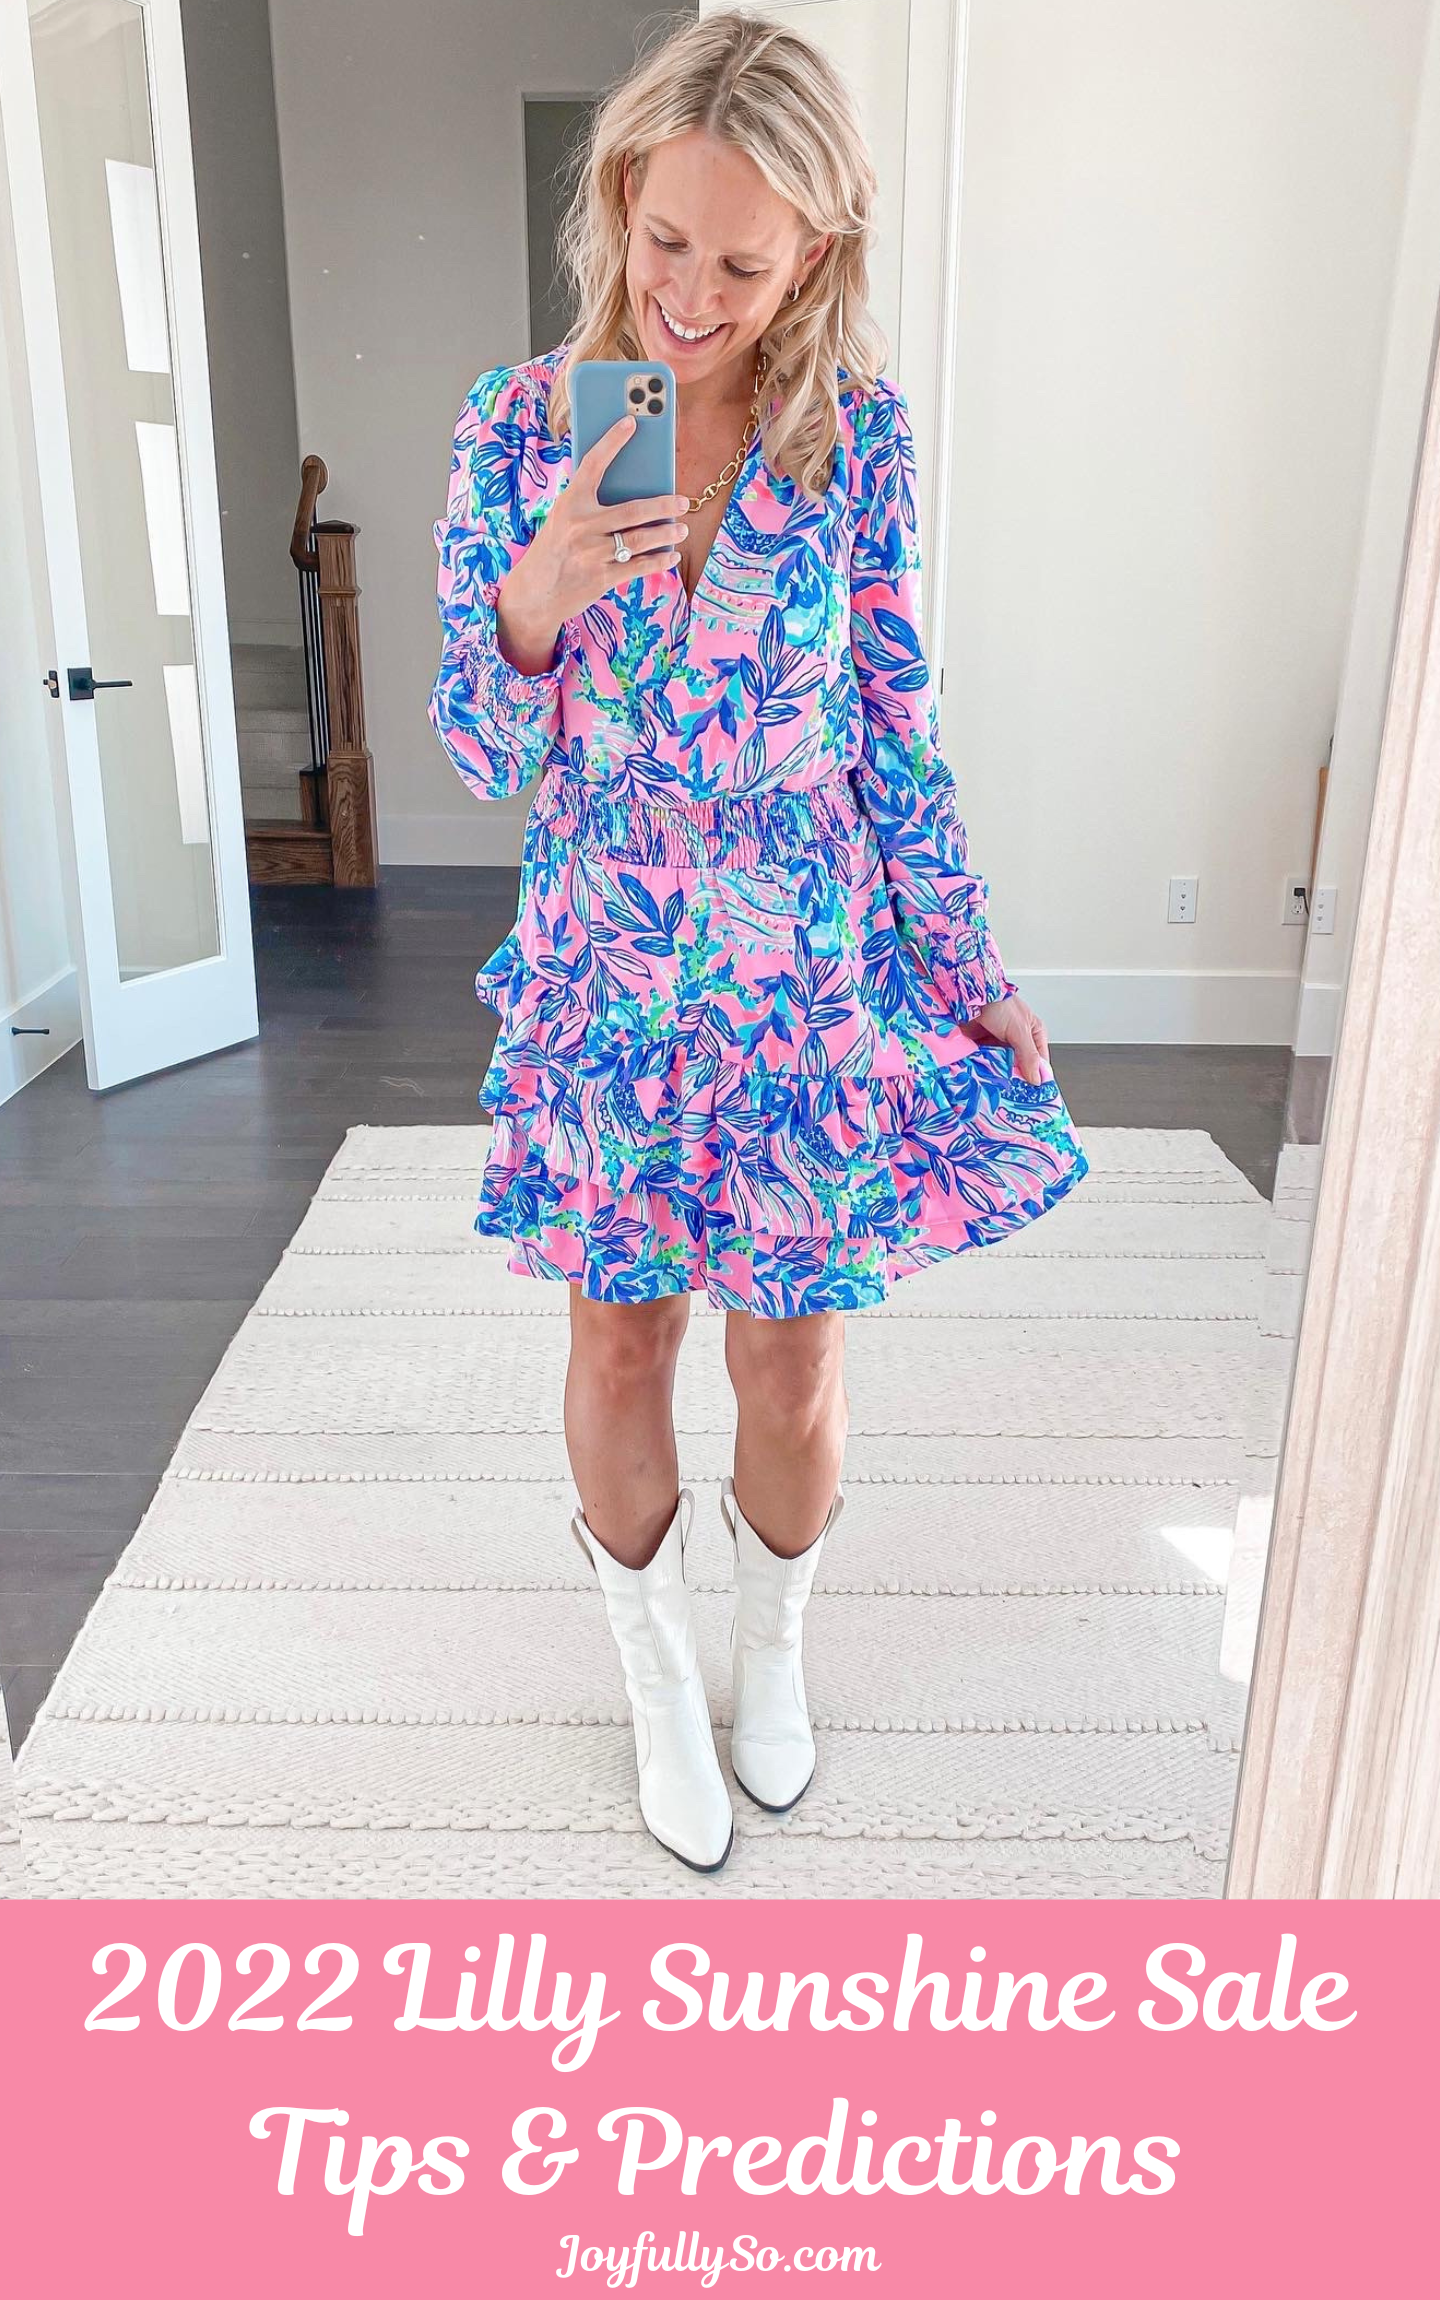 Summer 2022 Lilly Sunshine Sale Predictions | Lilly Pulitzer summer sale